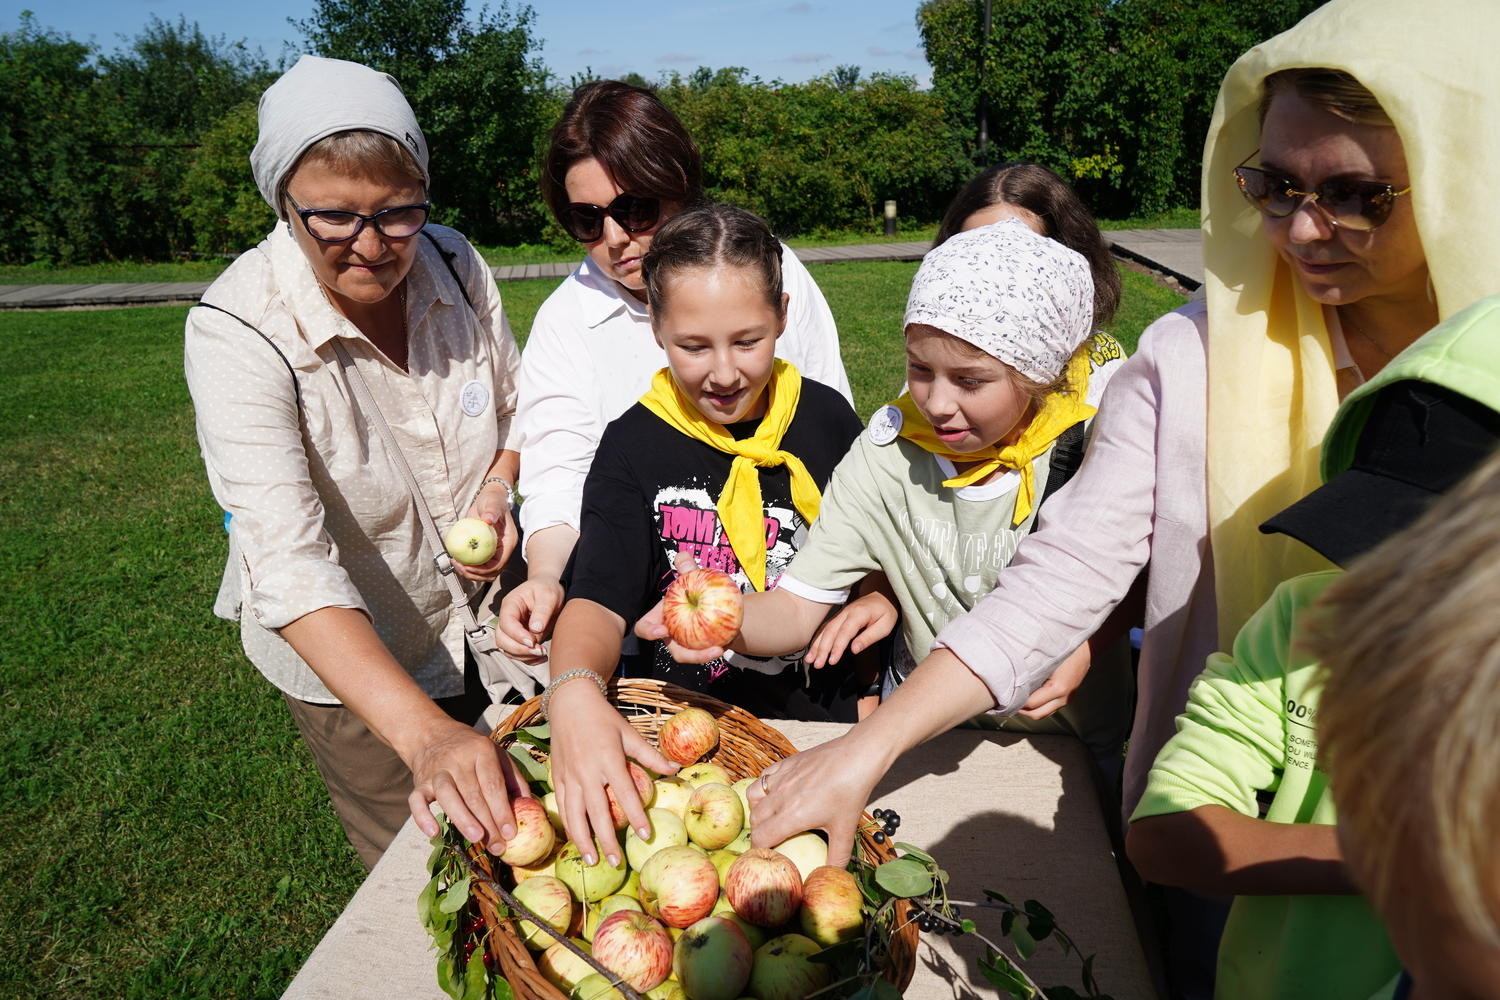 Apple Spas was celebrated in Suzdal